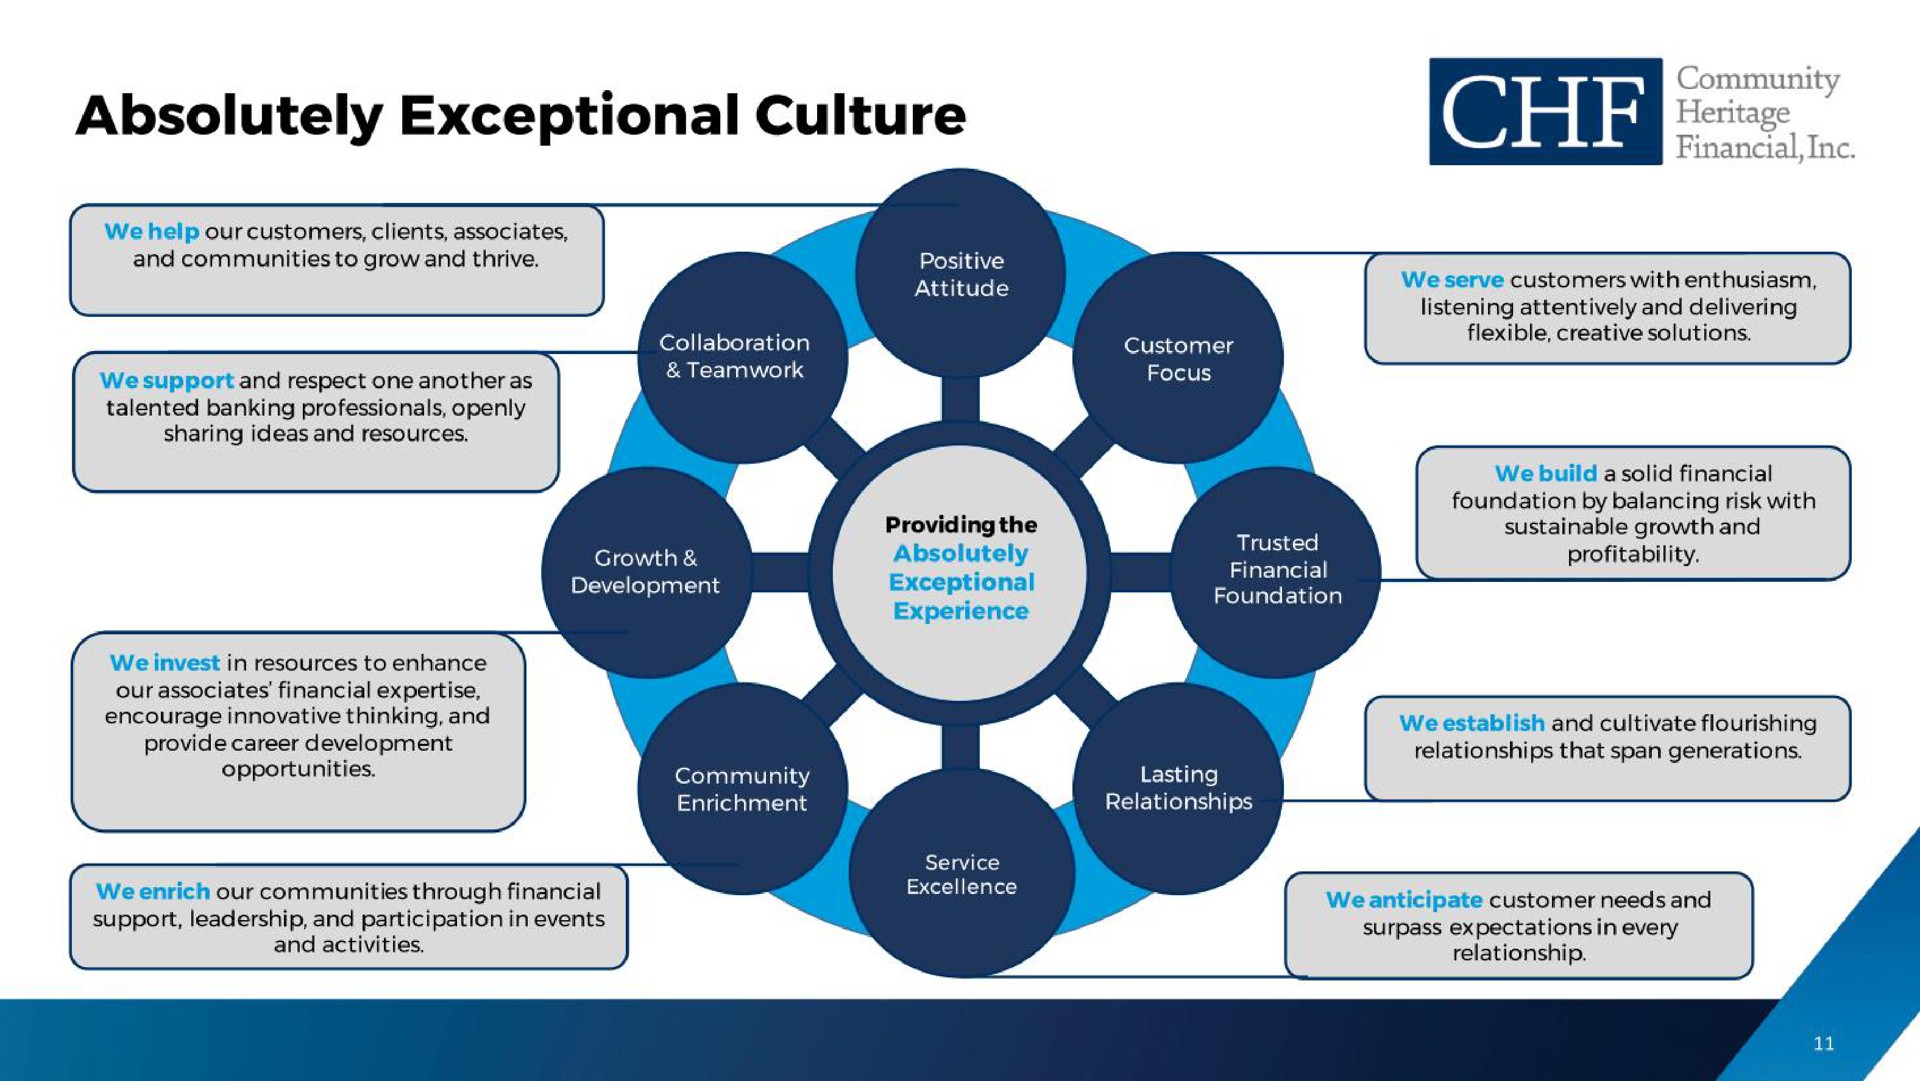 absolutely exceptional culture che be | Community Heritage Financial